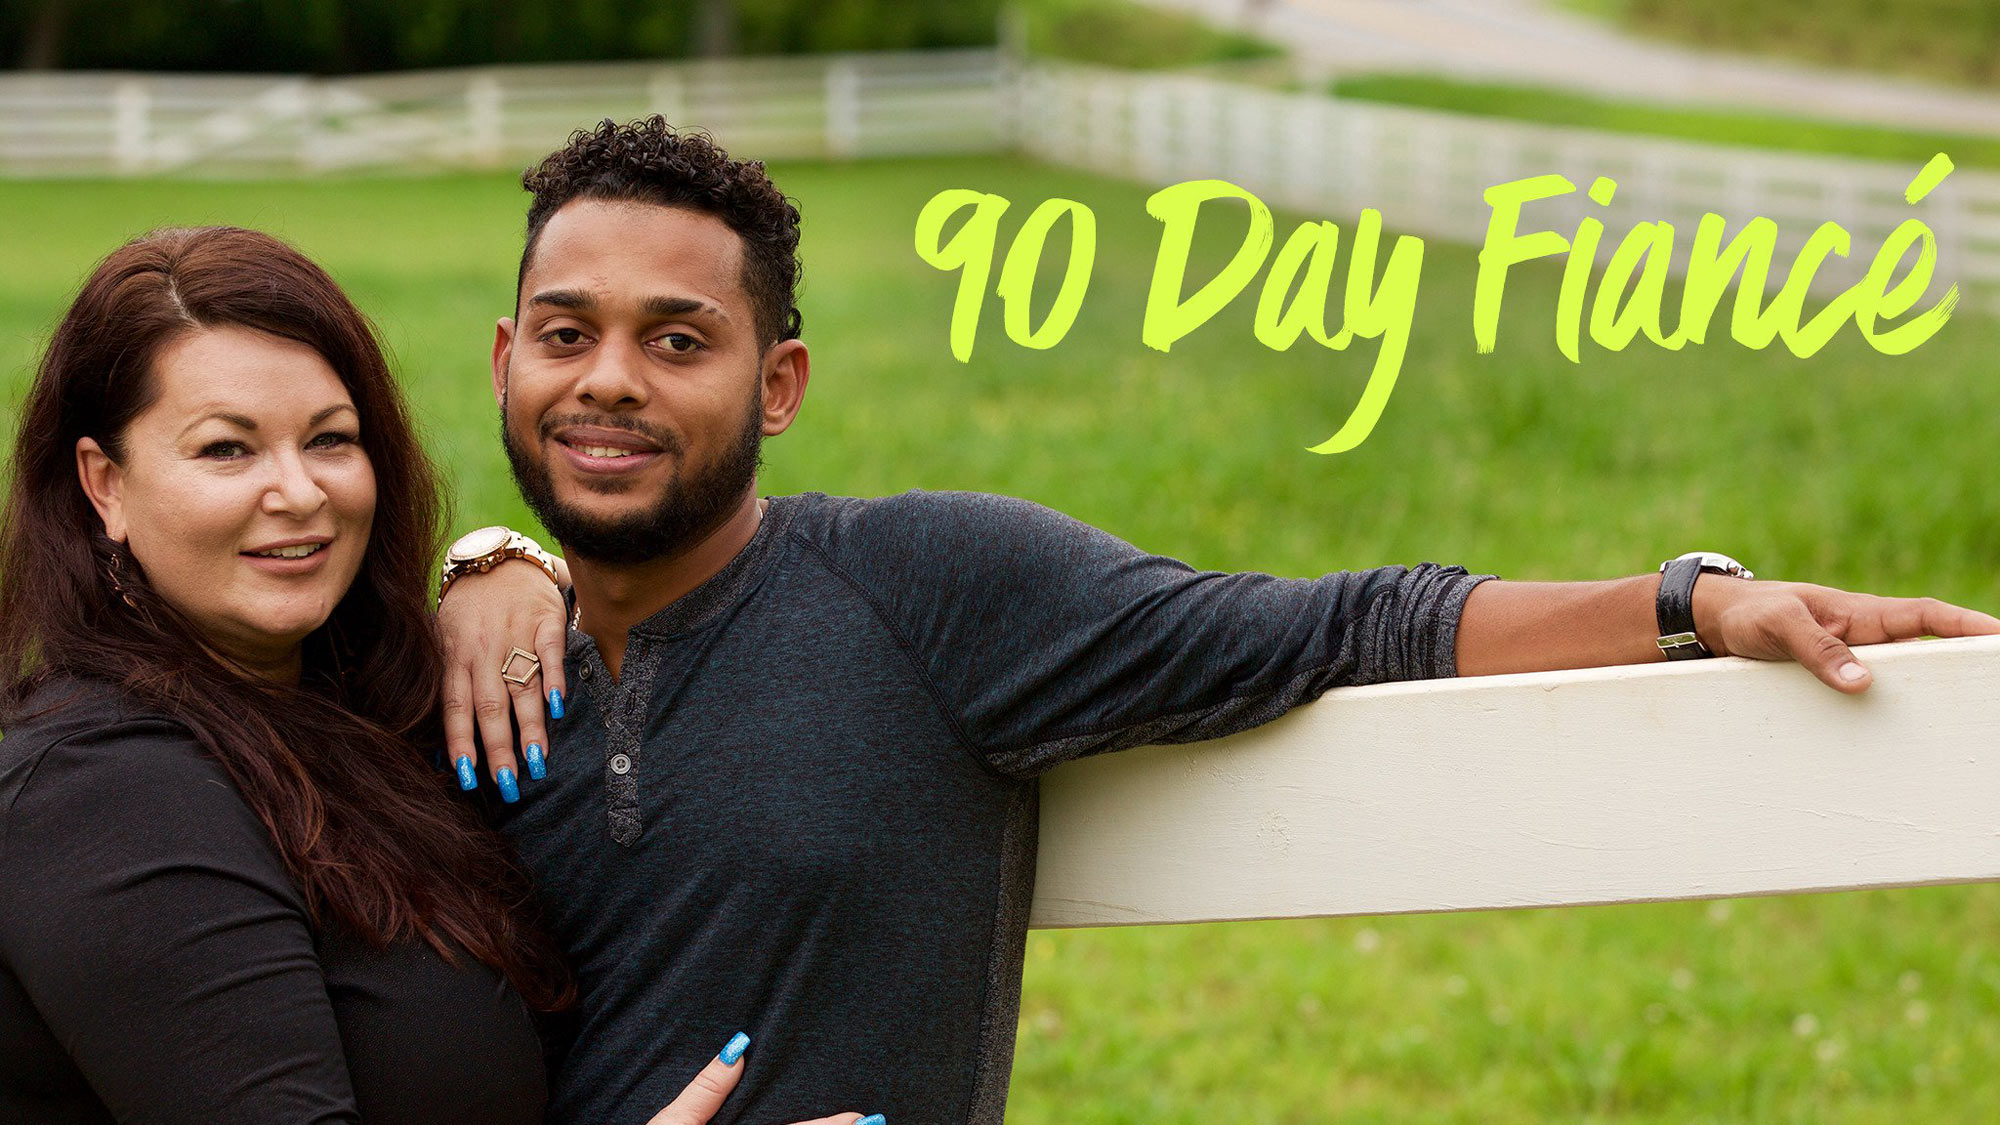 How to watch 90 Day Fiance in order | Tom's Guide